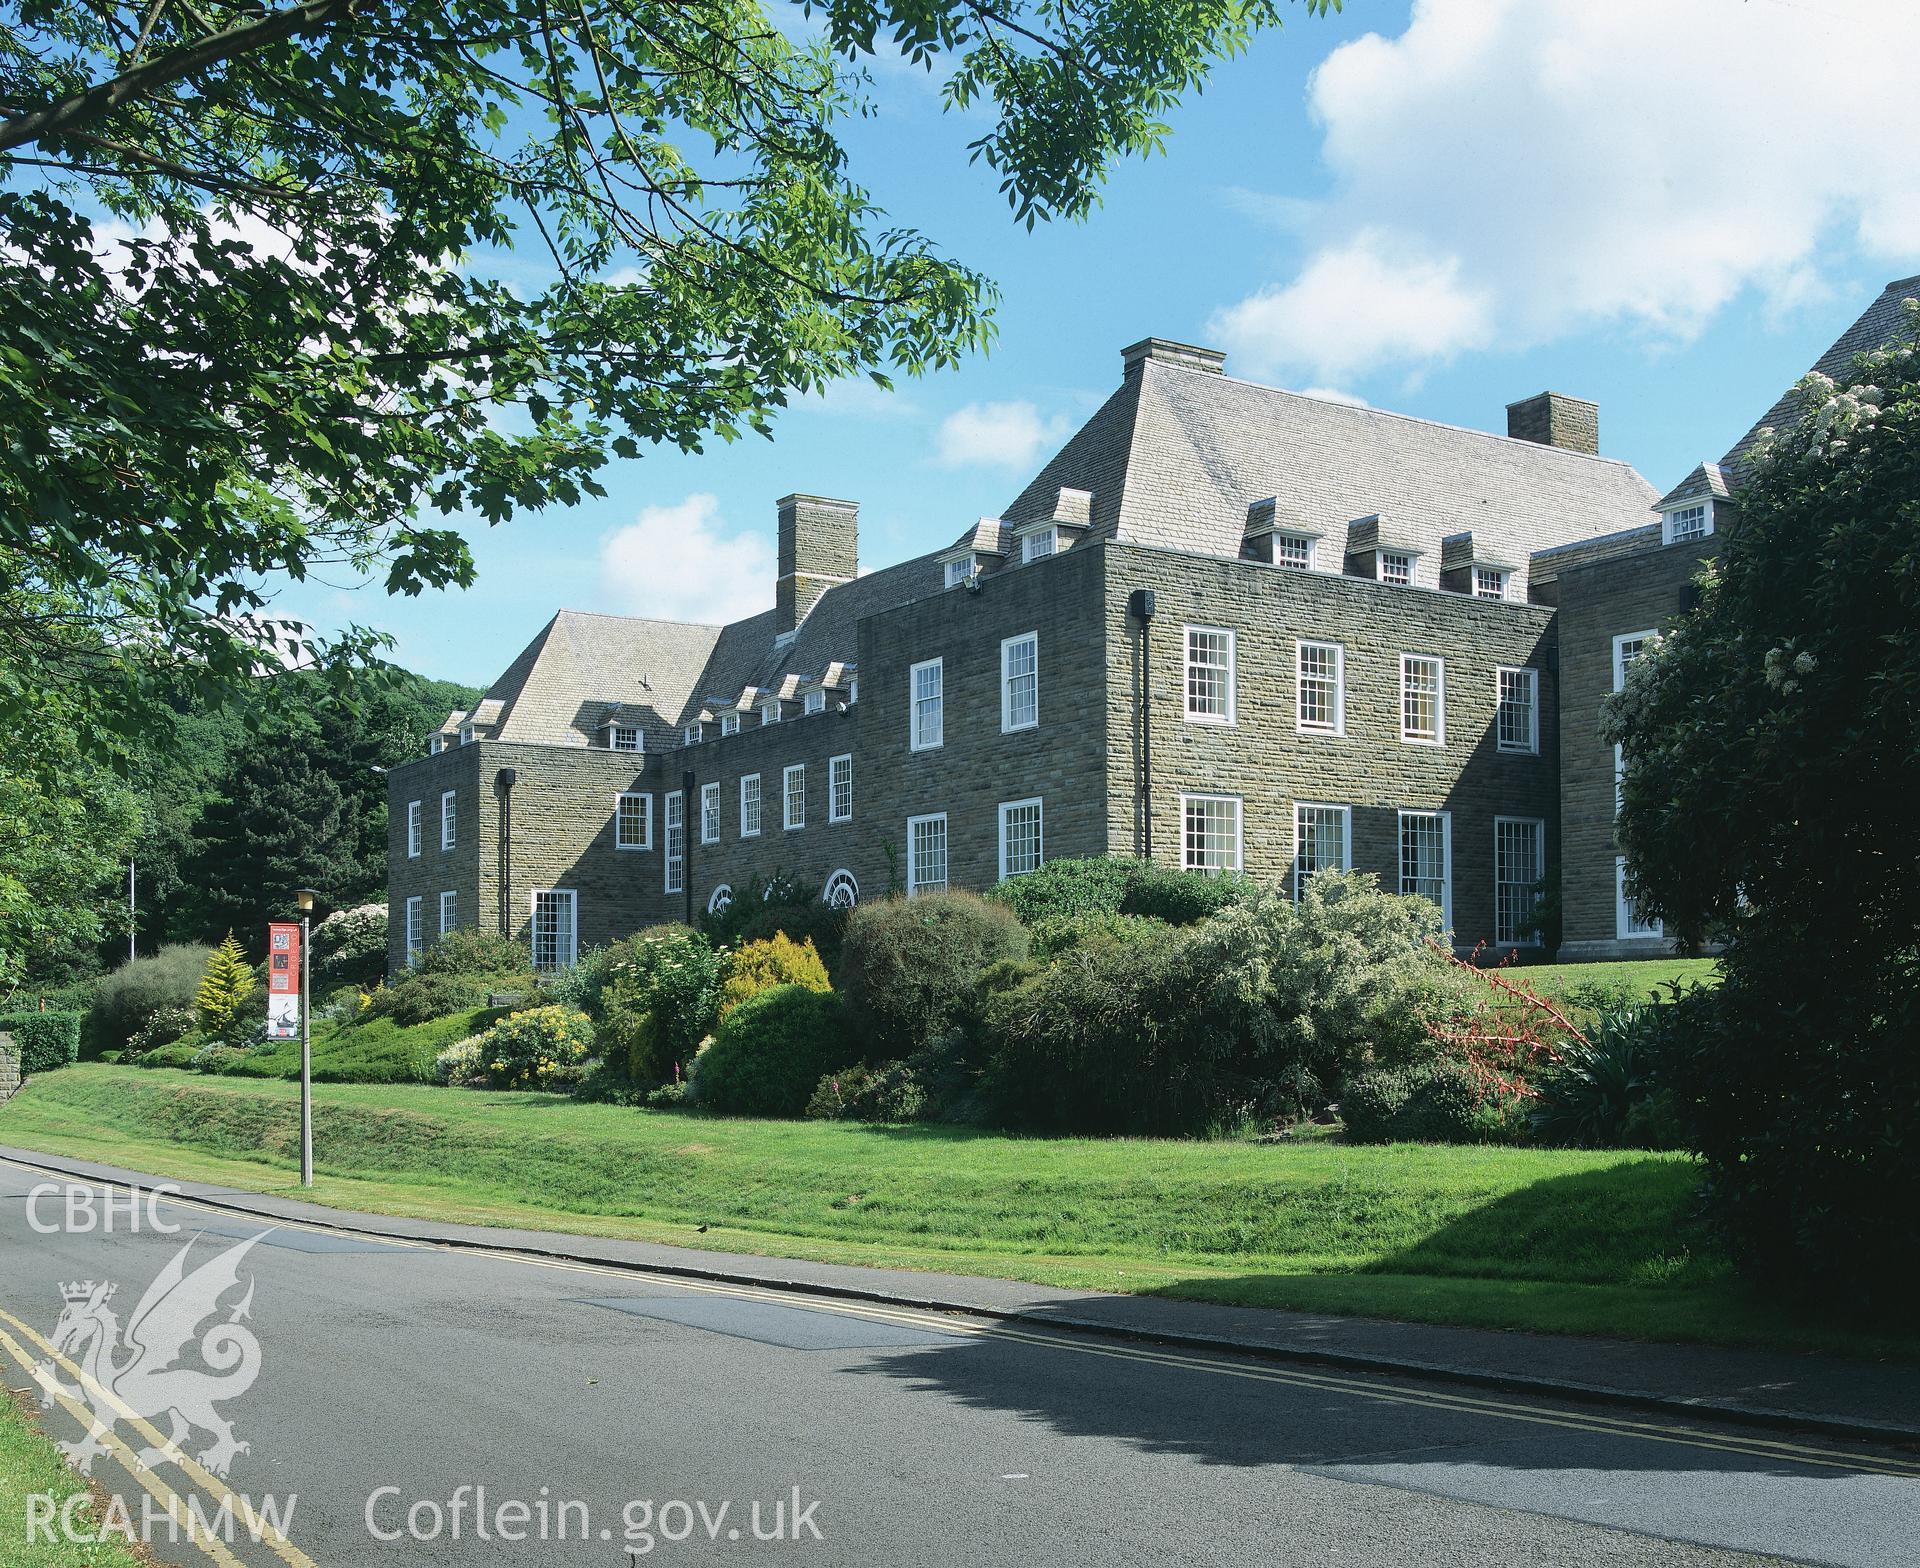 RCAHMW colour transparency showing view of Pantycelyn Hall, University College of Wales, Aberystwyth